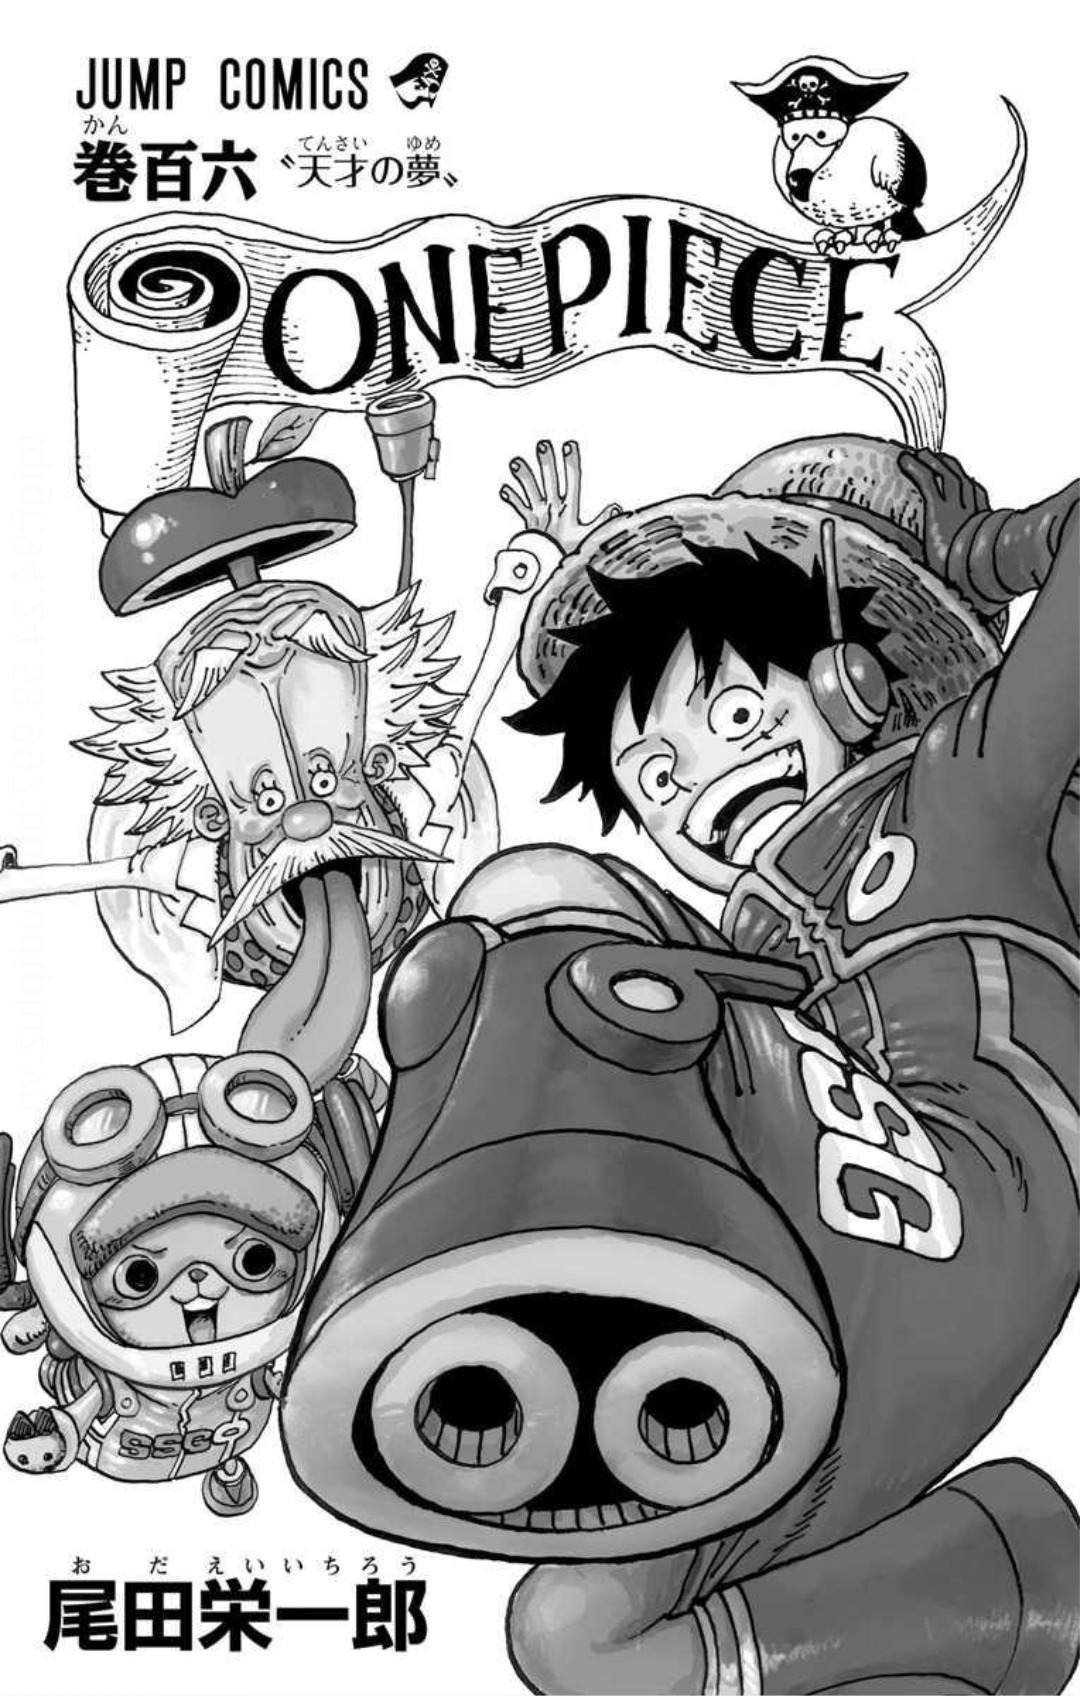 Spoiler - One Piece Chapter 1065 Spoilers Discussion, Page 85